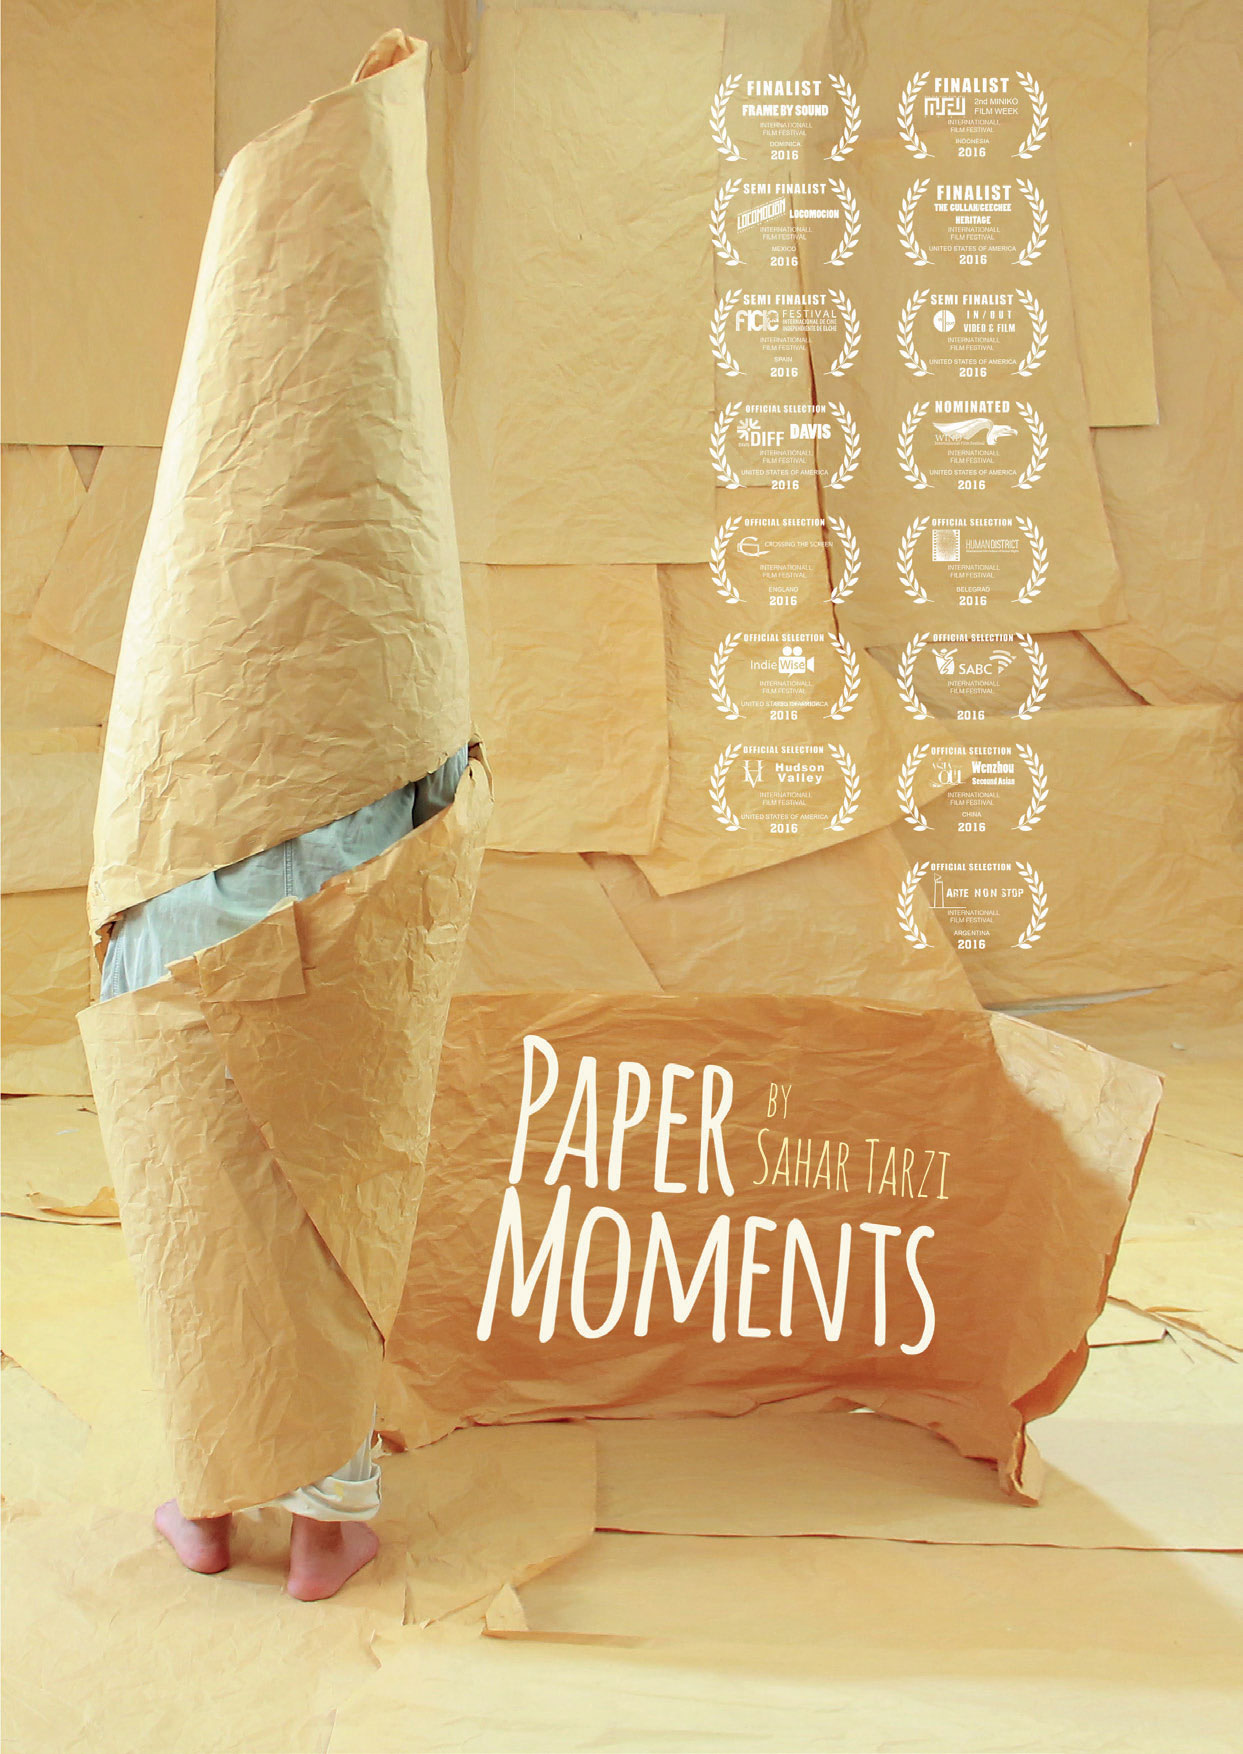 Paper moments animation